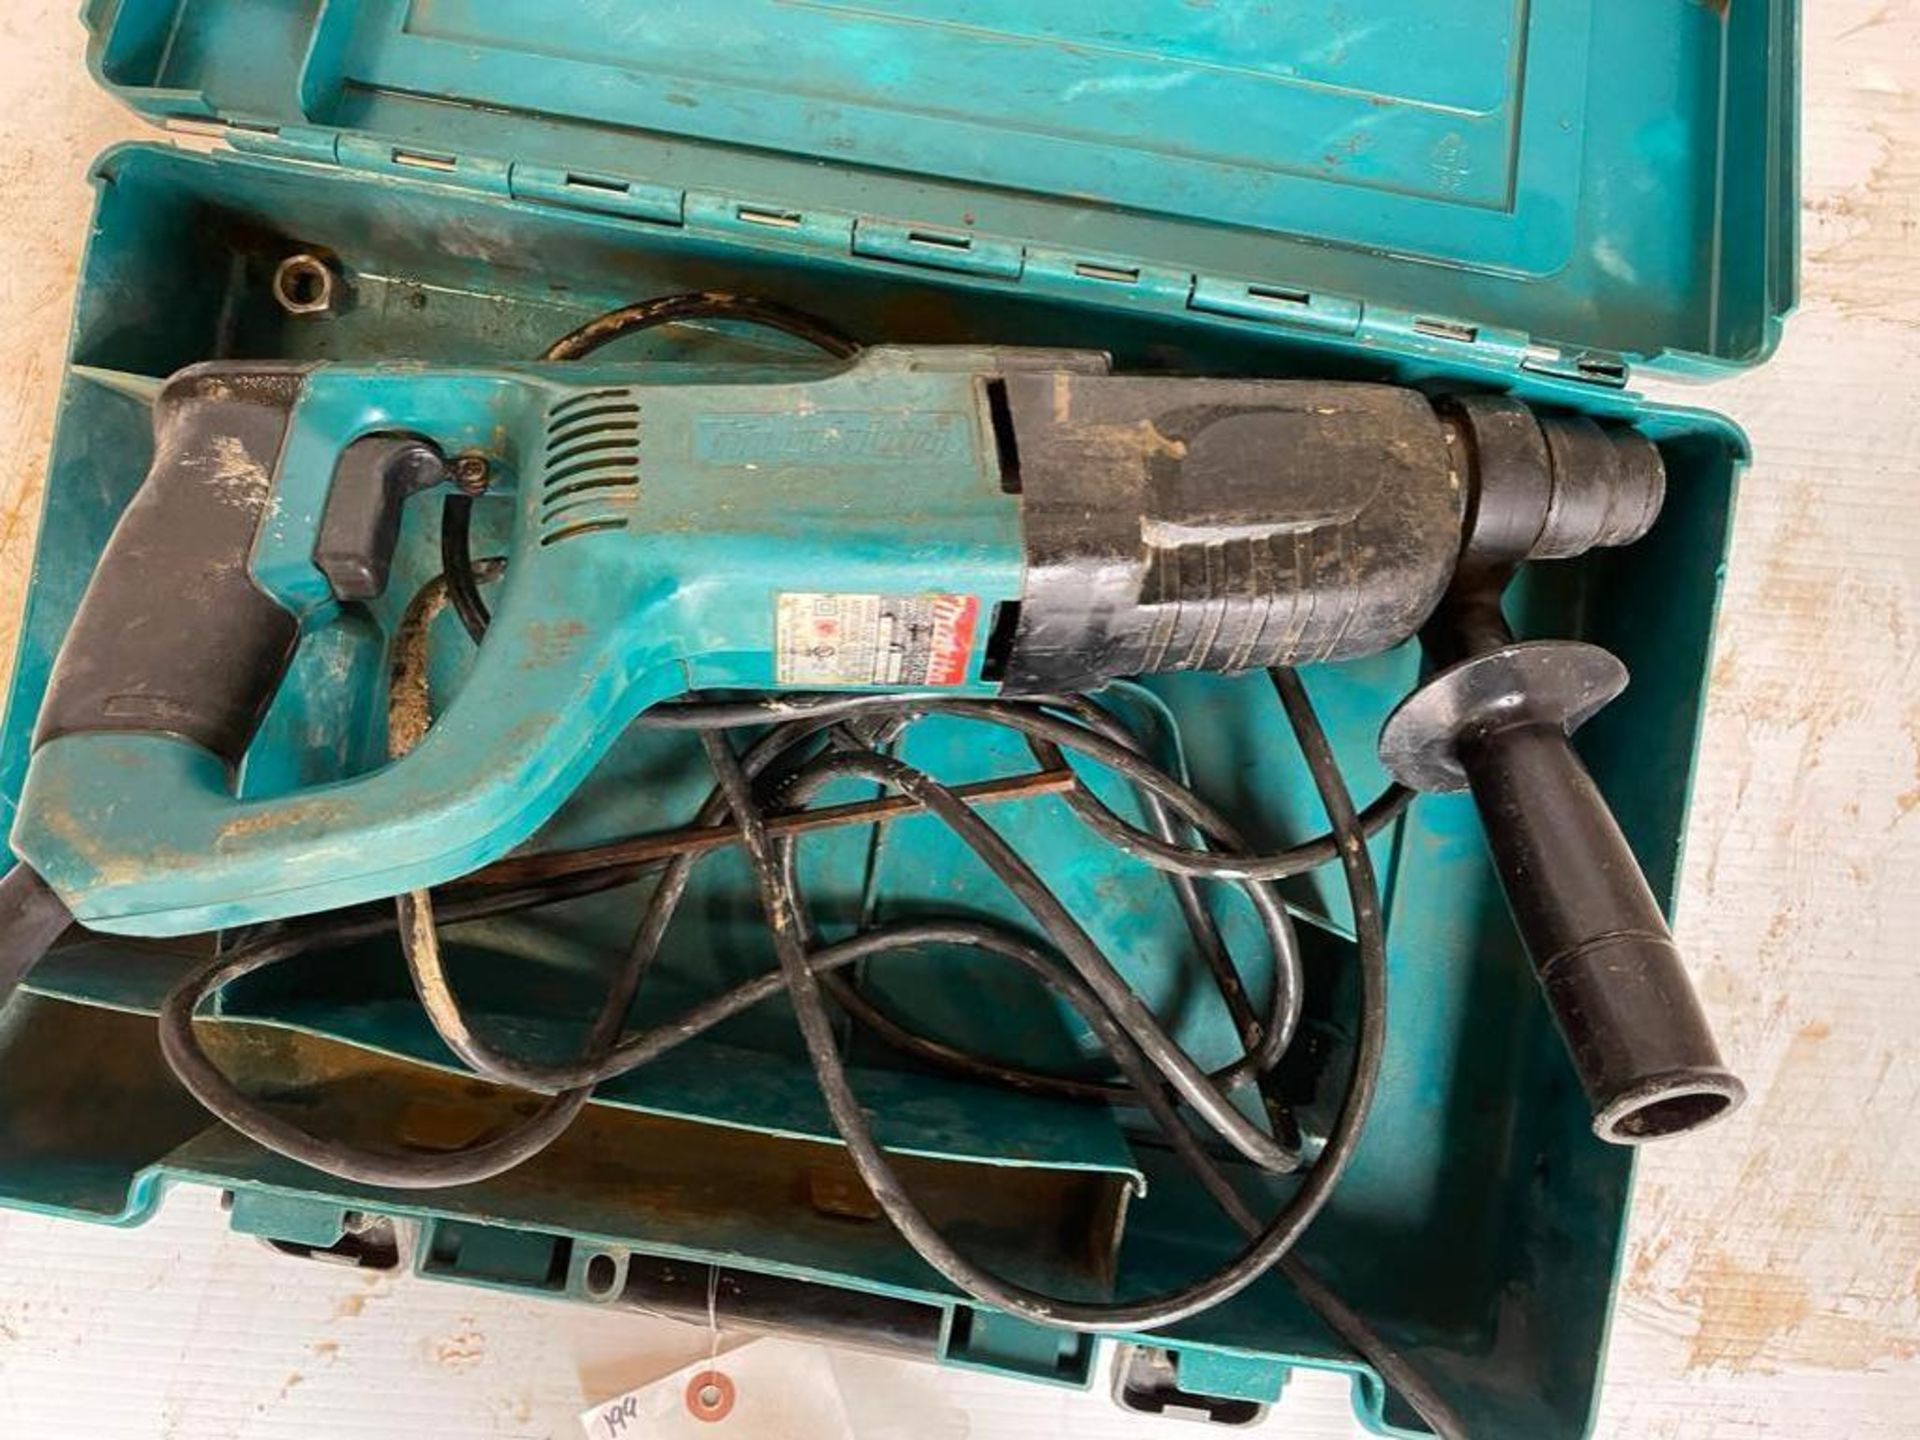 Makita HR2455 Hammer Drill, 120V. Located in Hazelwood, MO - Image 4 of 5